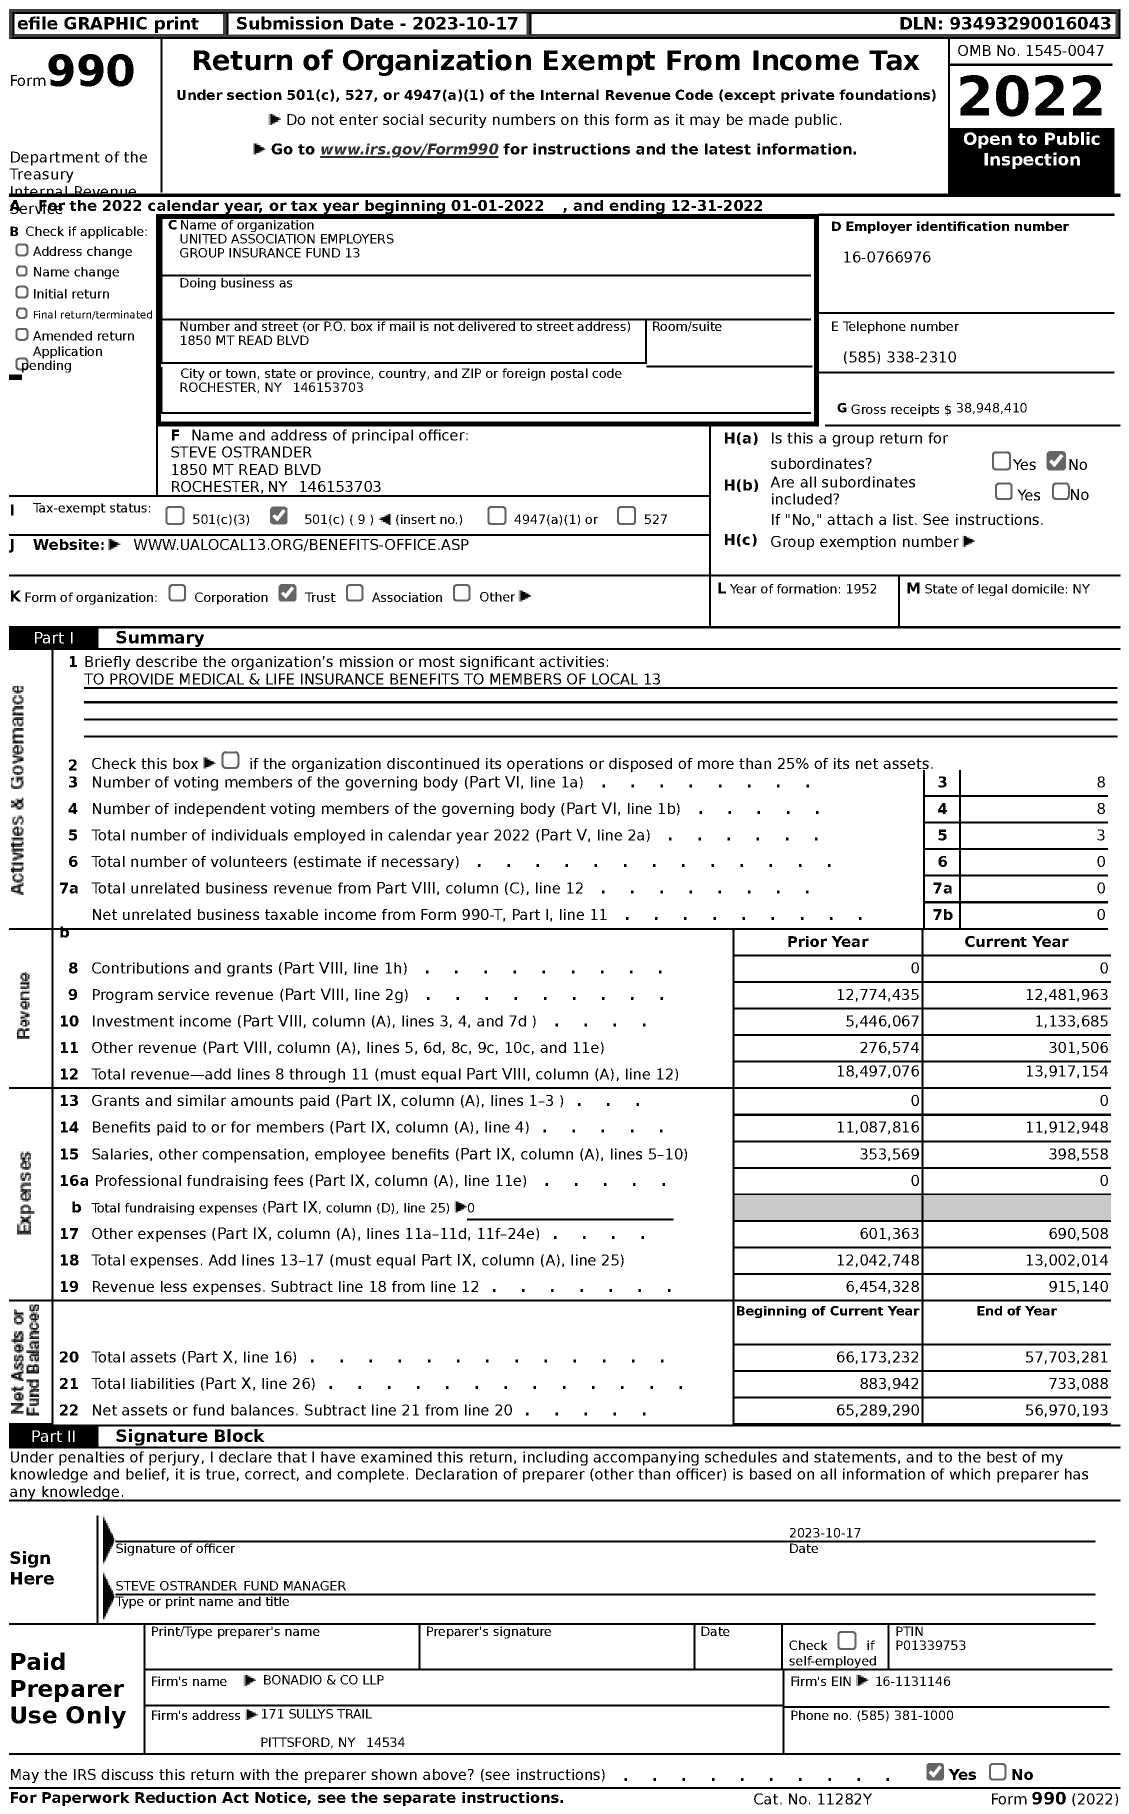 Image of first page of 2022 Form 990 for United Association Employers Group Insurance Fund 13